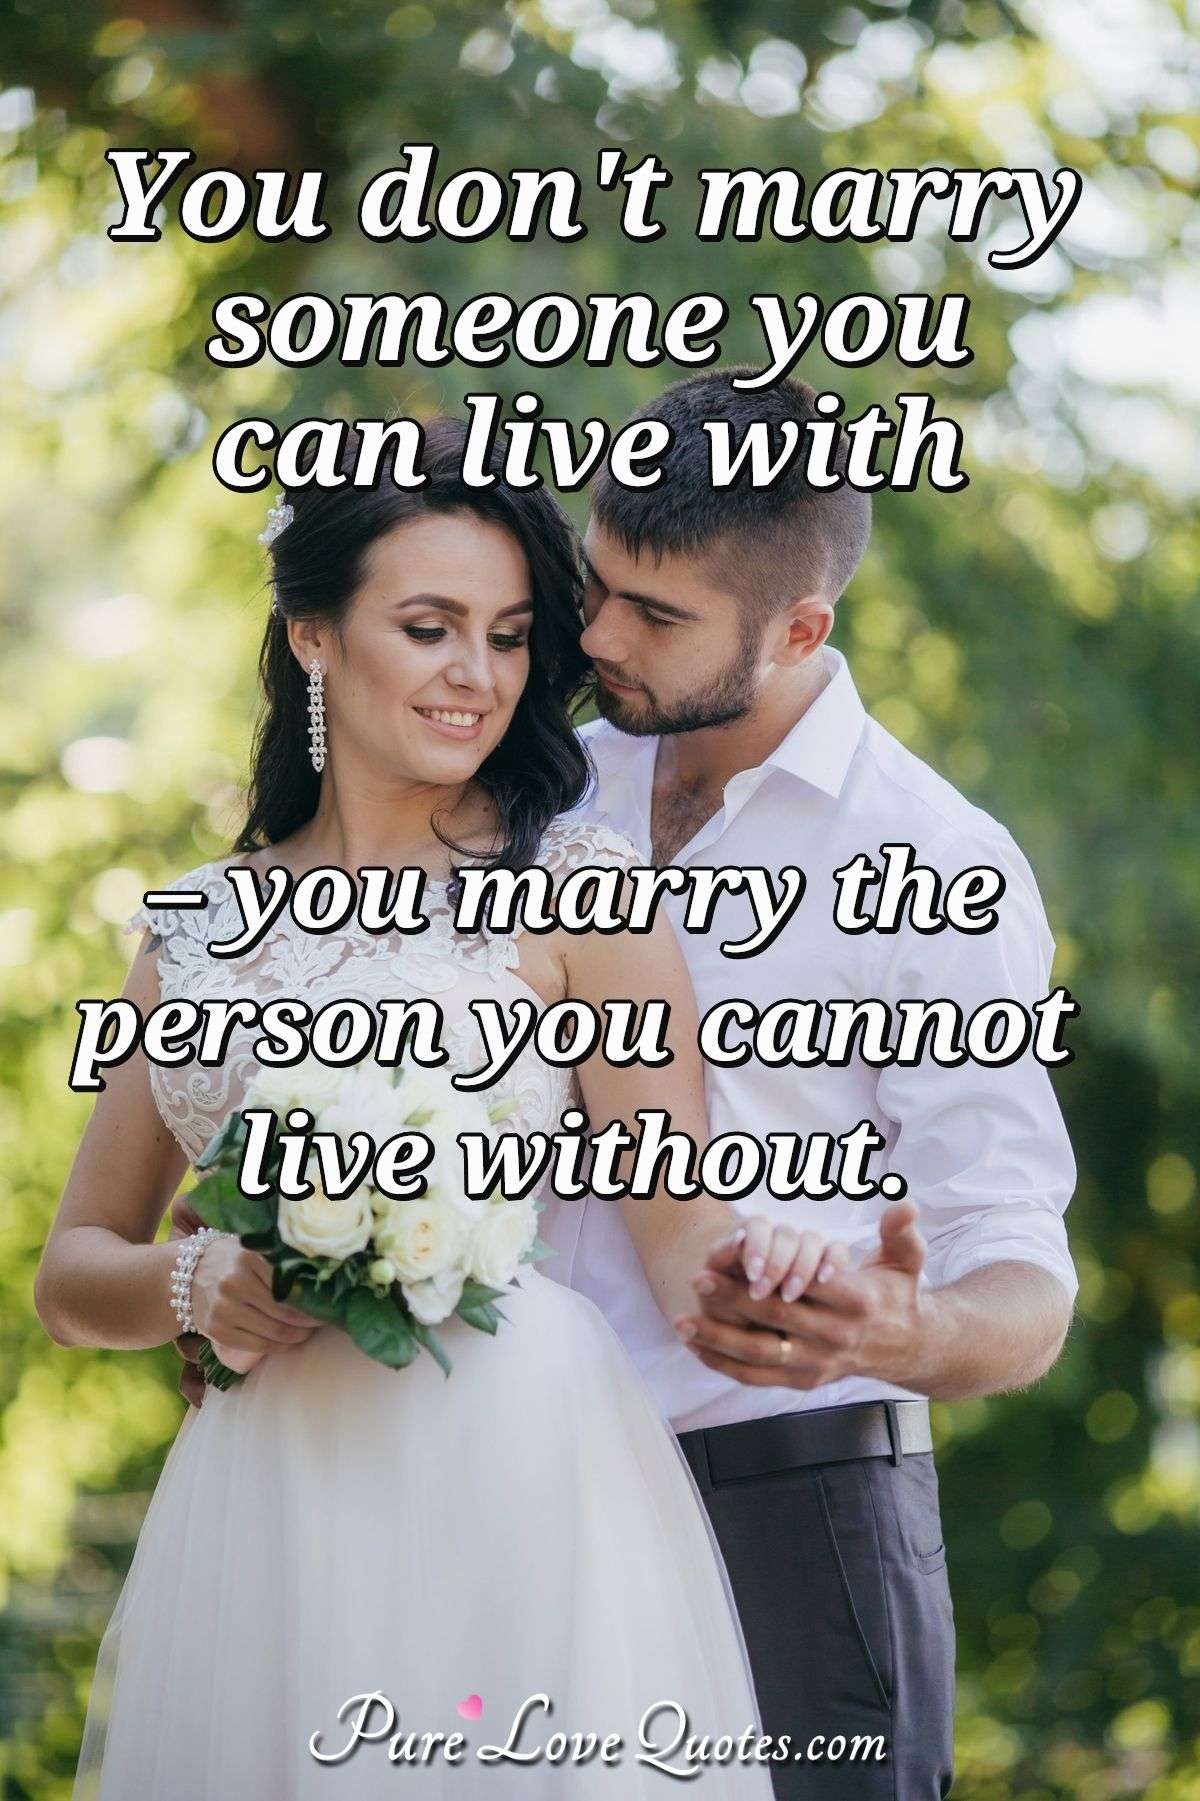 You don't marry someone you can live with, you marry the person who you cannot live without. - Anonymous